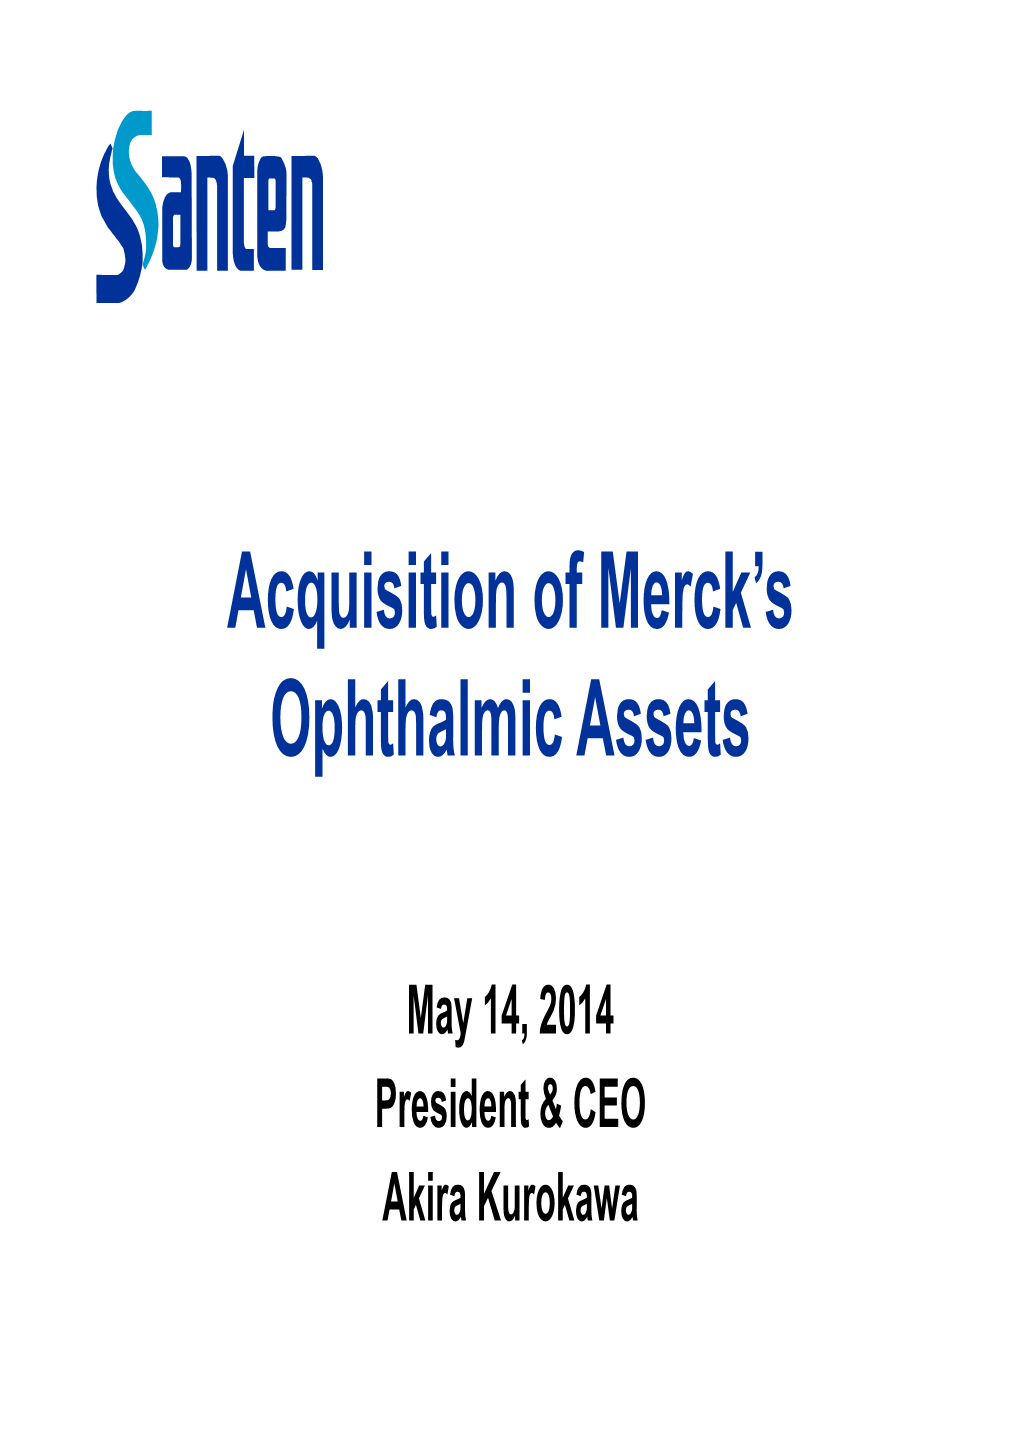 Acquisition of Merck's Ophthalmic Assets